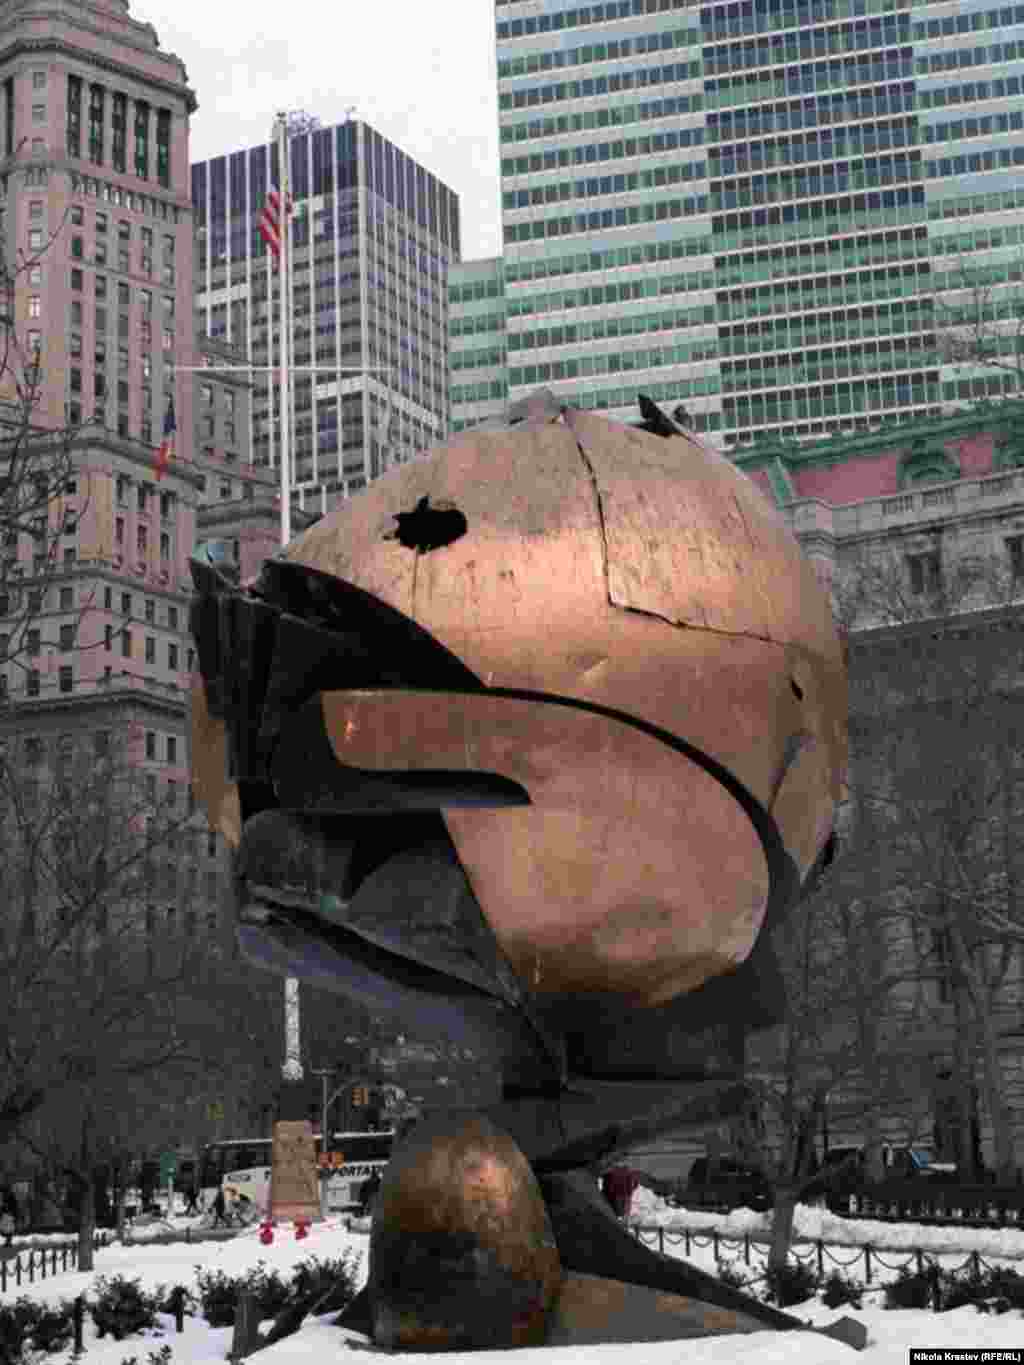 &quot;The Sphere,&quot; by German sculptor Fritz Koenig, stood in the plaza near the Twin Towers. It has been relocated to Battery Park at the southern tip of Manhattan, and still shows damage from the fire and debris.